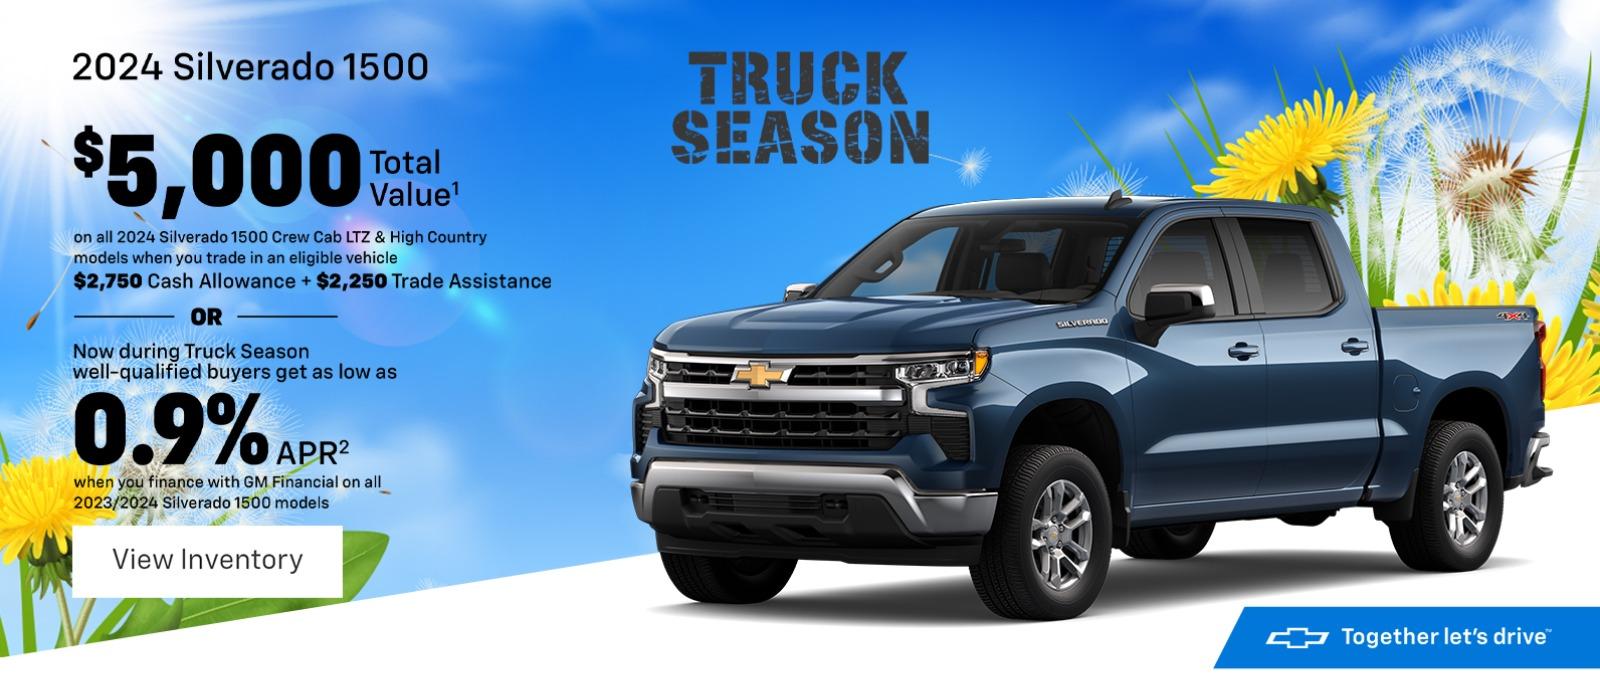 2024 Silverado 1500 $5,000 Total Value¹ on all 2024 Silverado 1500 Crew Cab LTZ & High Country models when you trade in an eligible vehicle $2,750 Cash Allowance + $2,250 Trade Assistance OR Now during Truck Season well-qualified buyers get as low as 0.9% APR when you finance with GM Financial on all 2023/2024 Silverado 1500 models